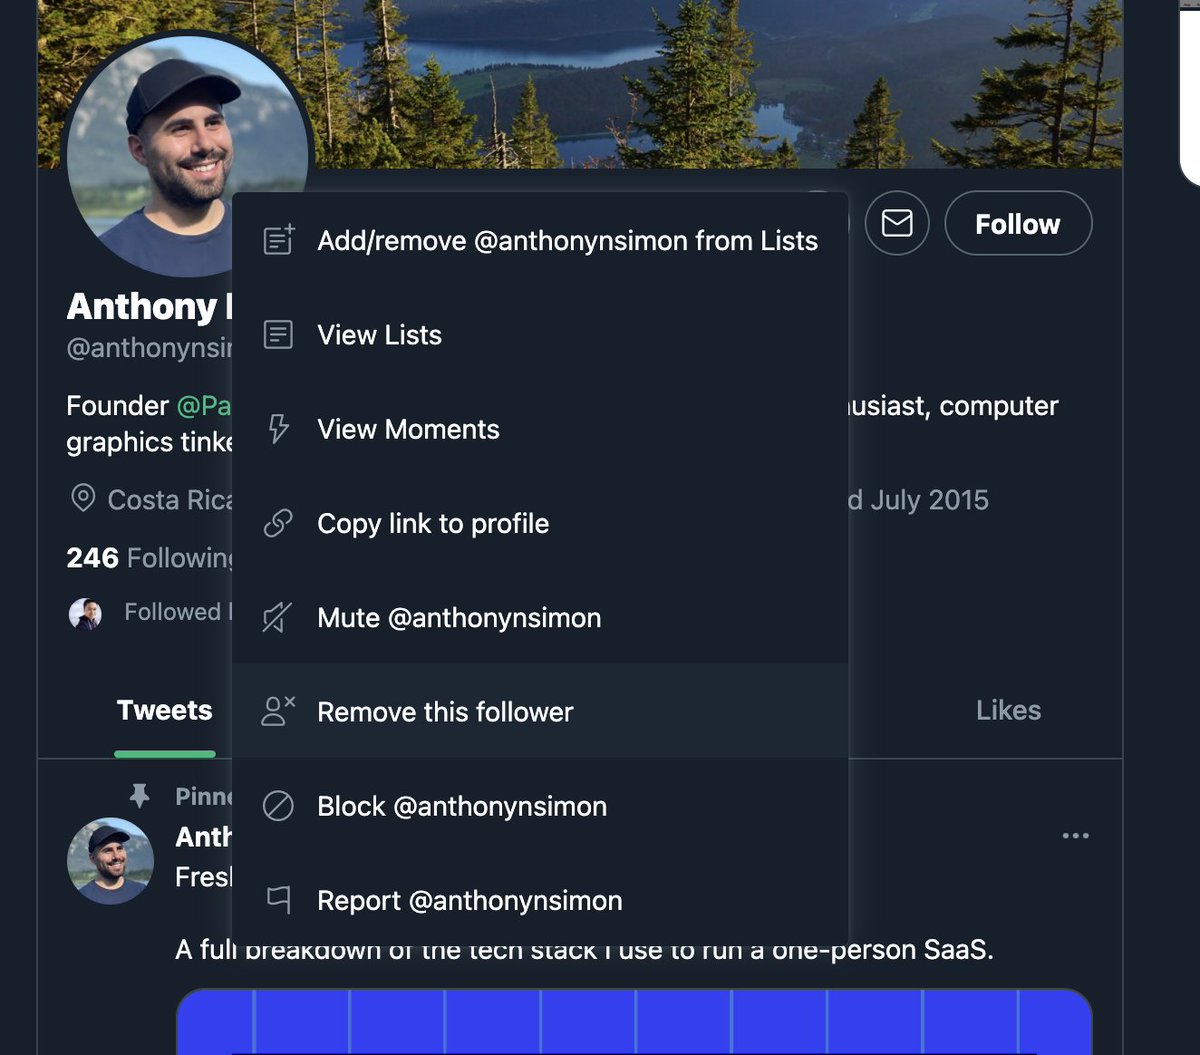 levelsio on Twitter: "New Twitter feature: remove this follower "